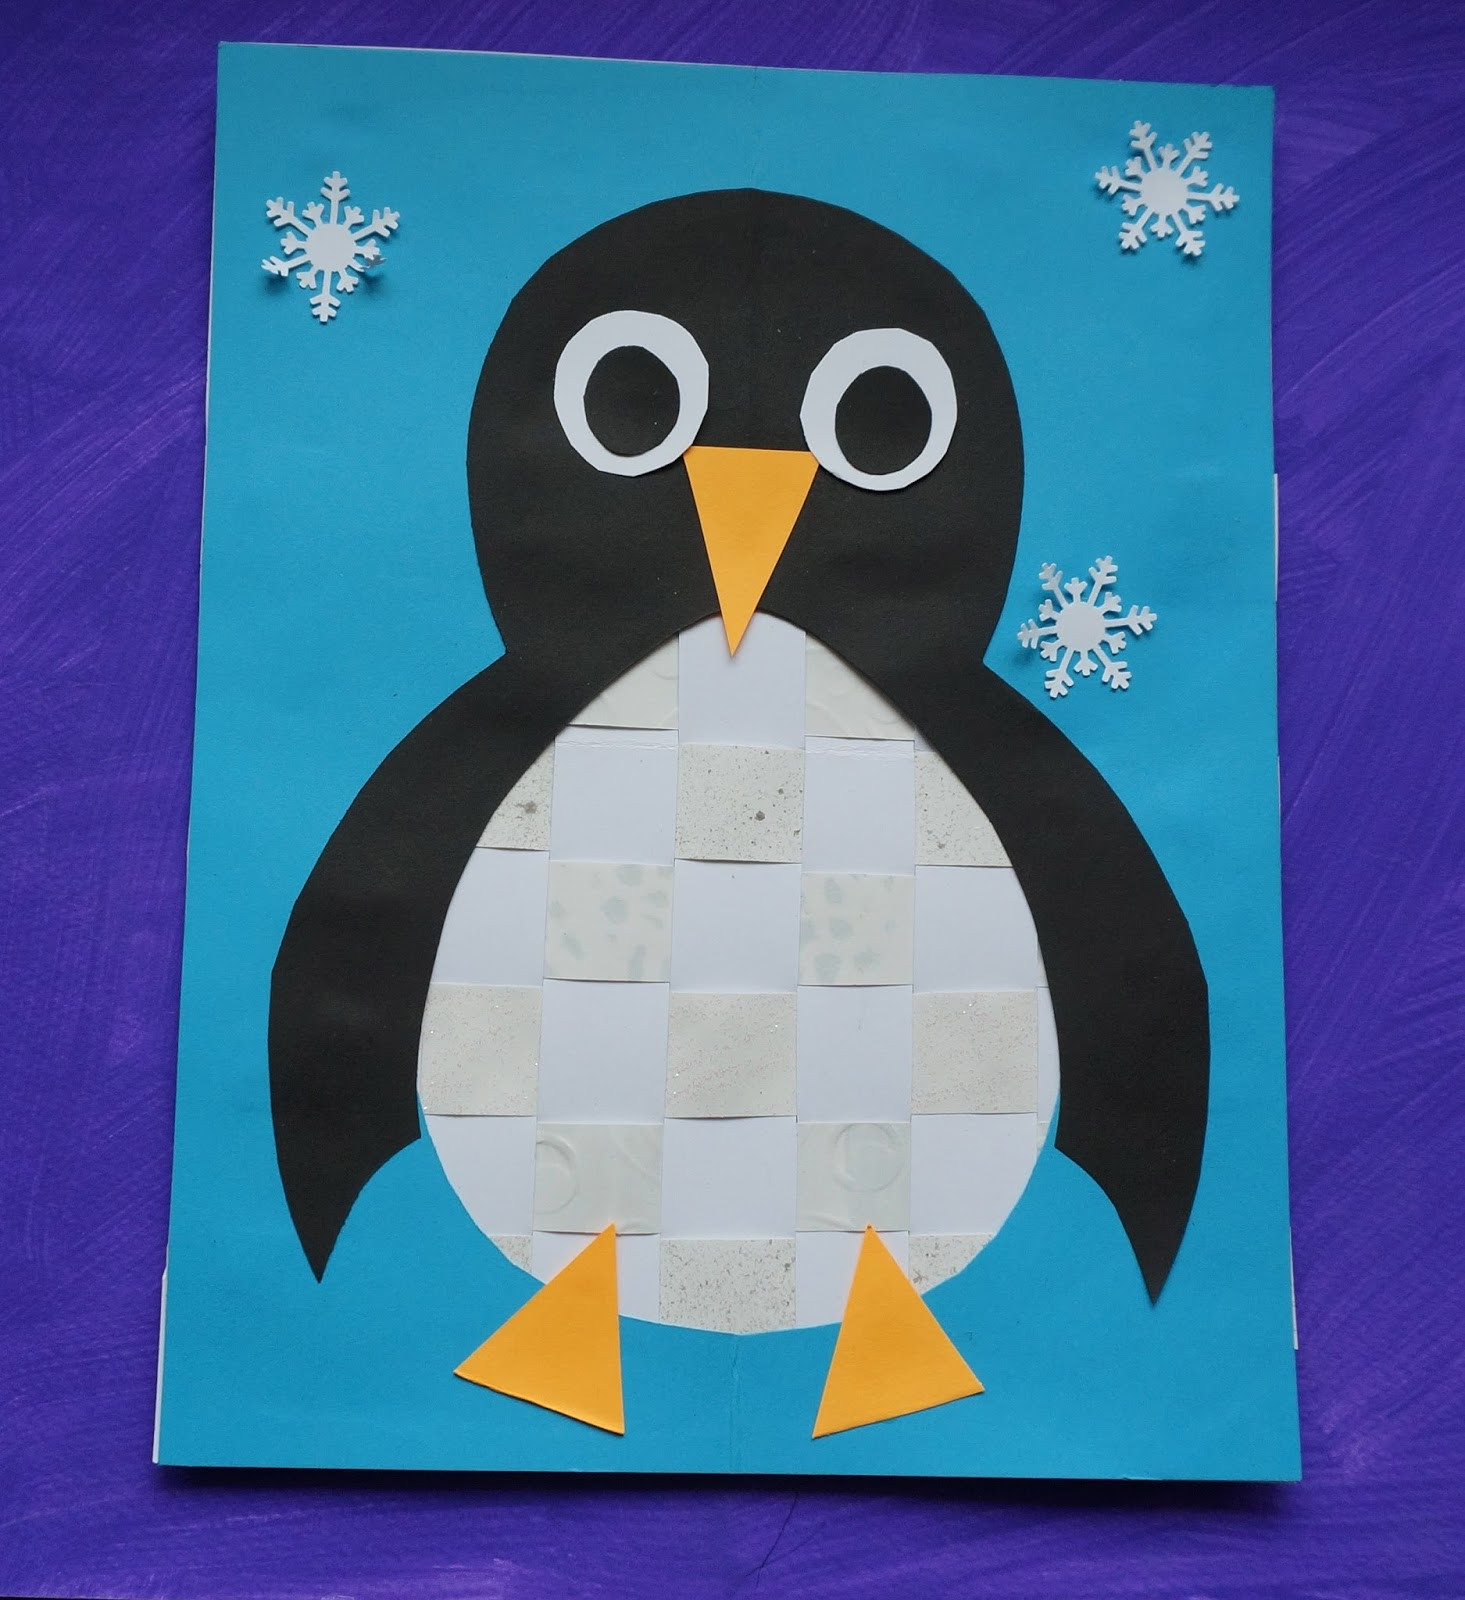 Winter Arts And Crafts For Kids
 that artist woman Winter Projects